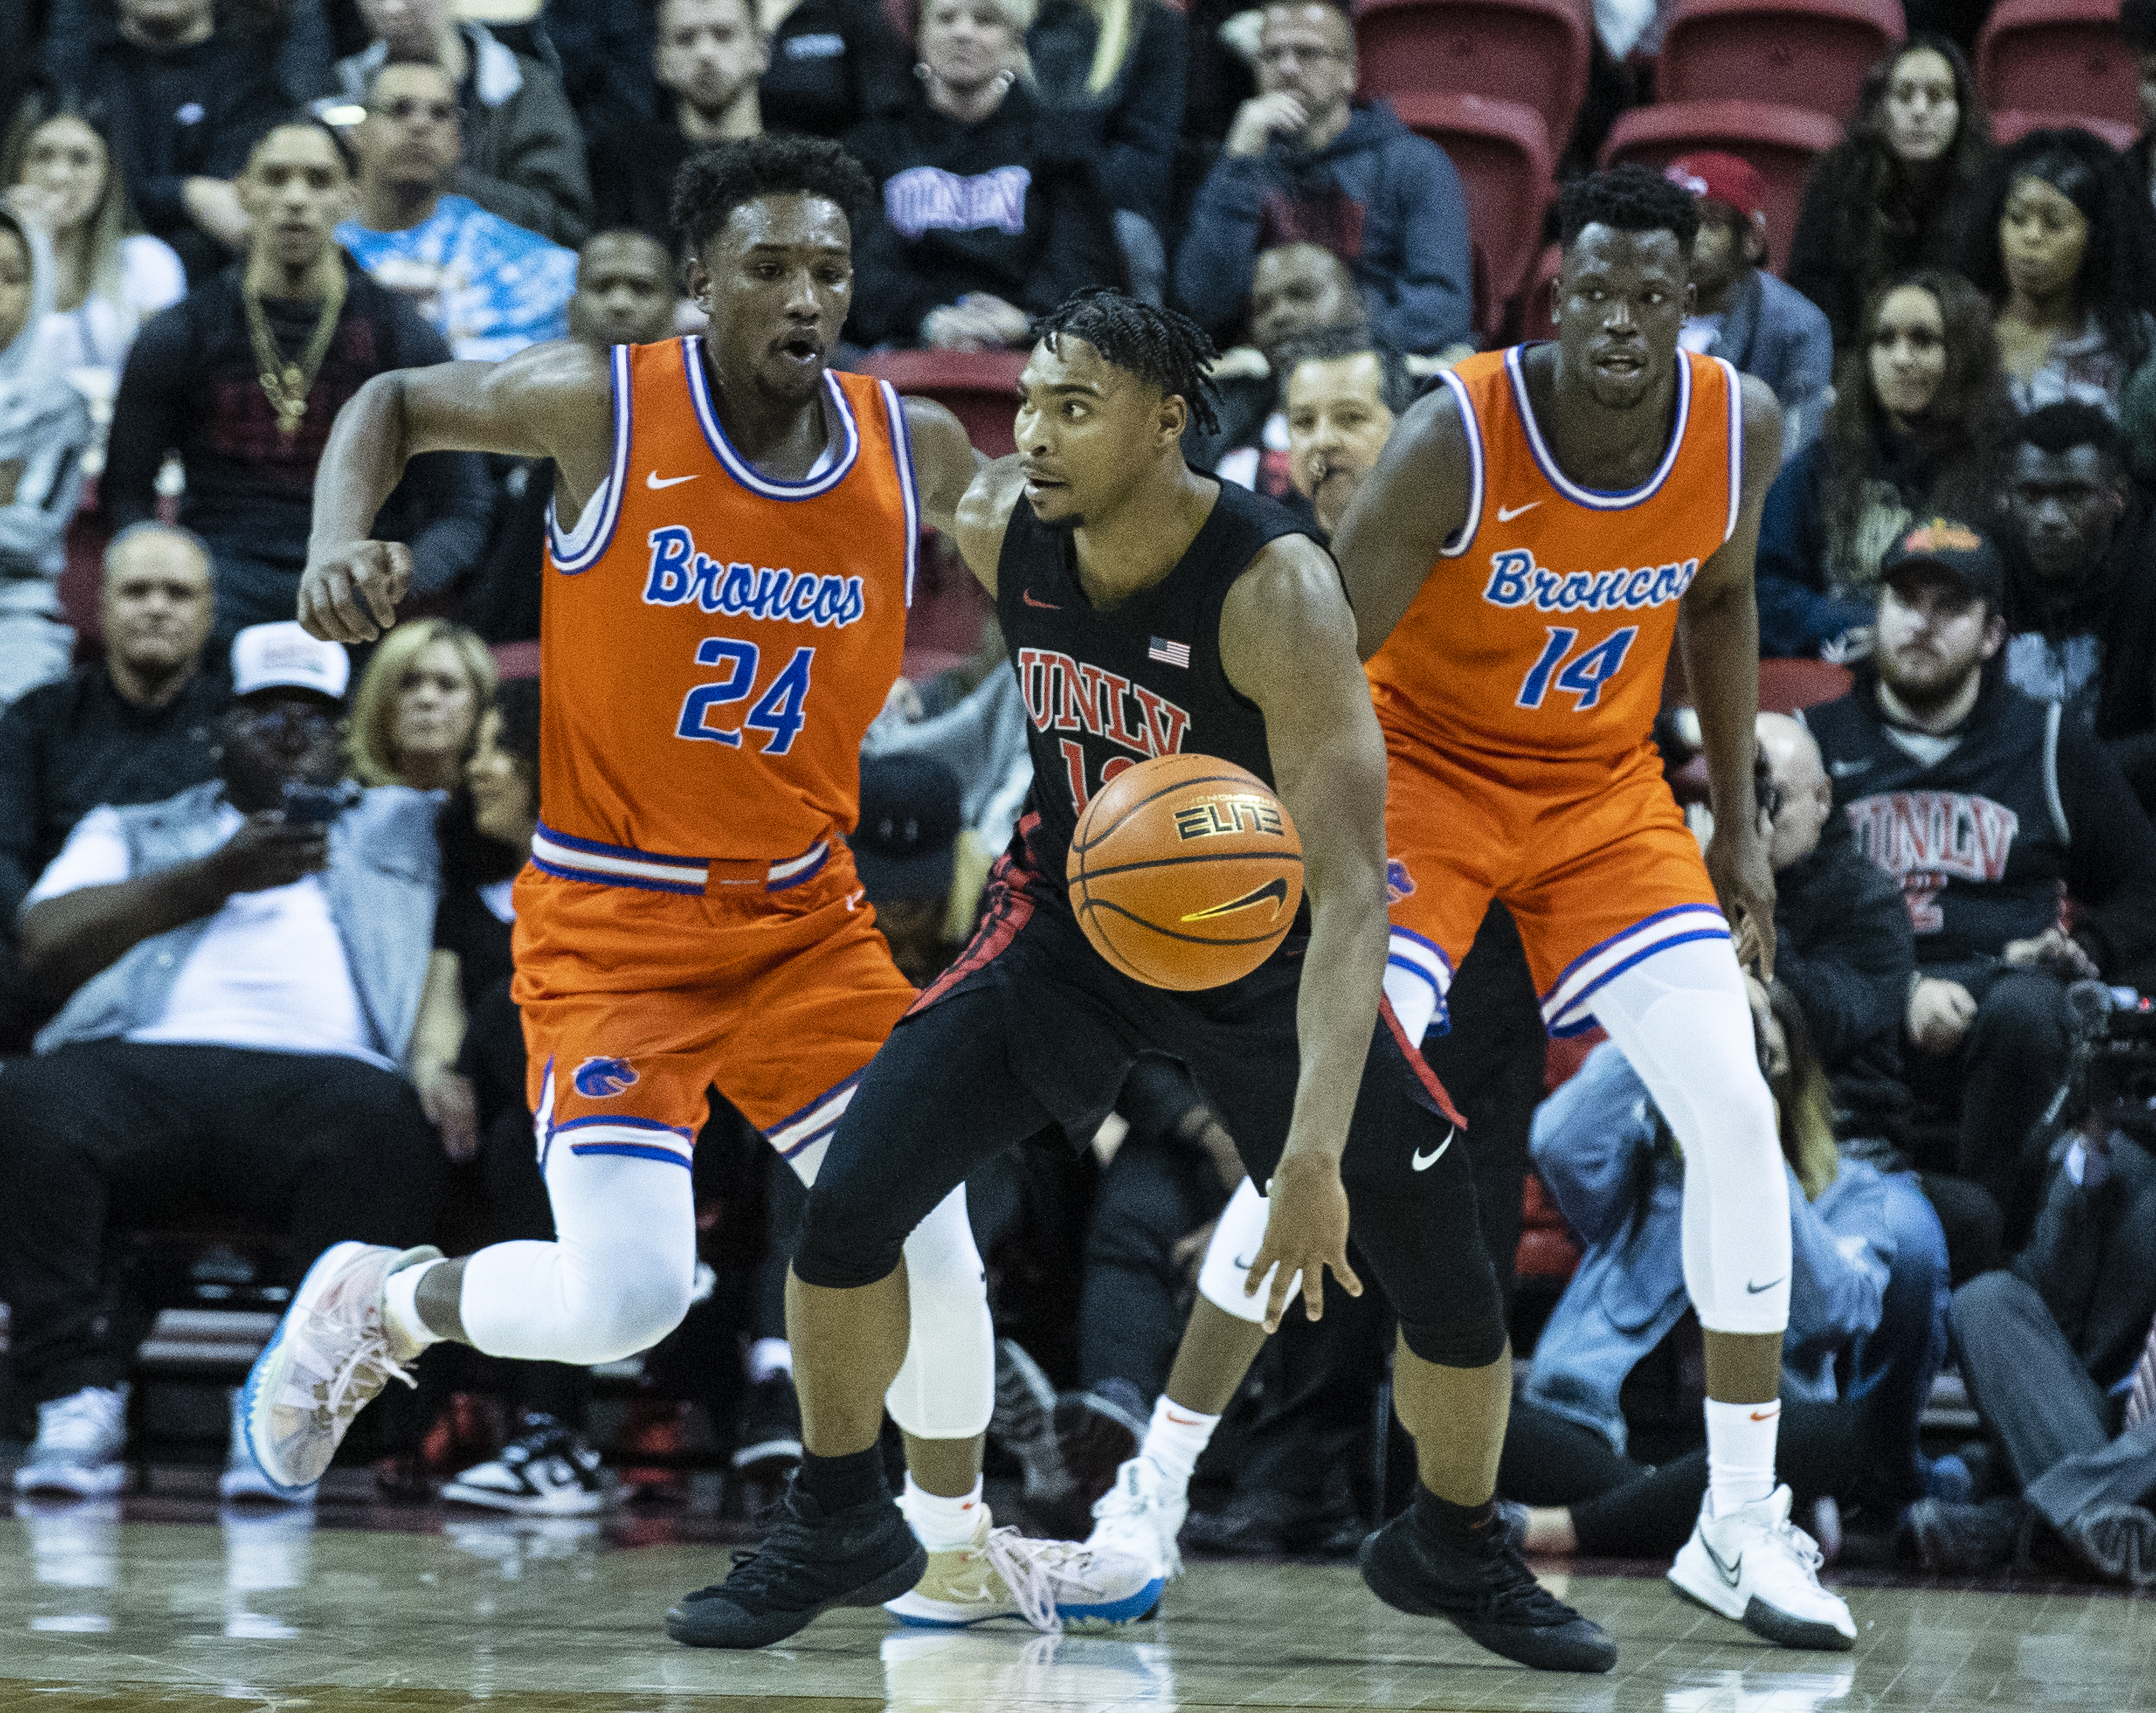 UNLV unable to extend streak, falls 86-76 to Boise State